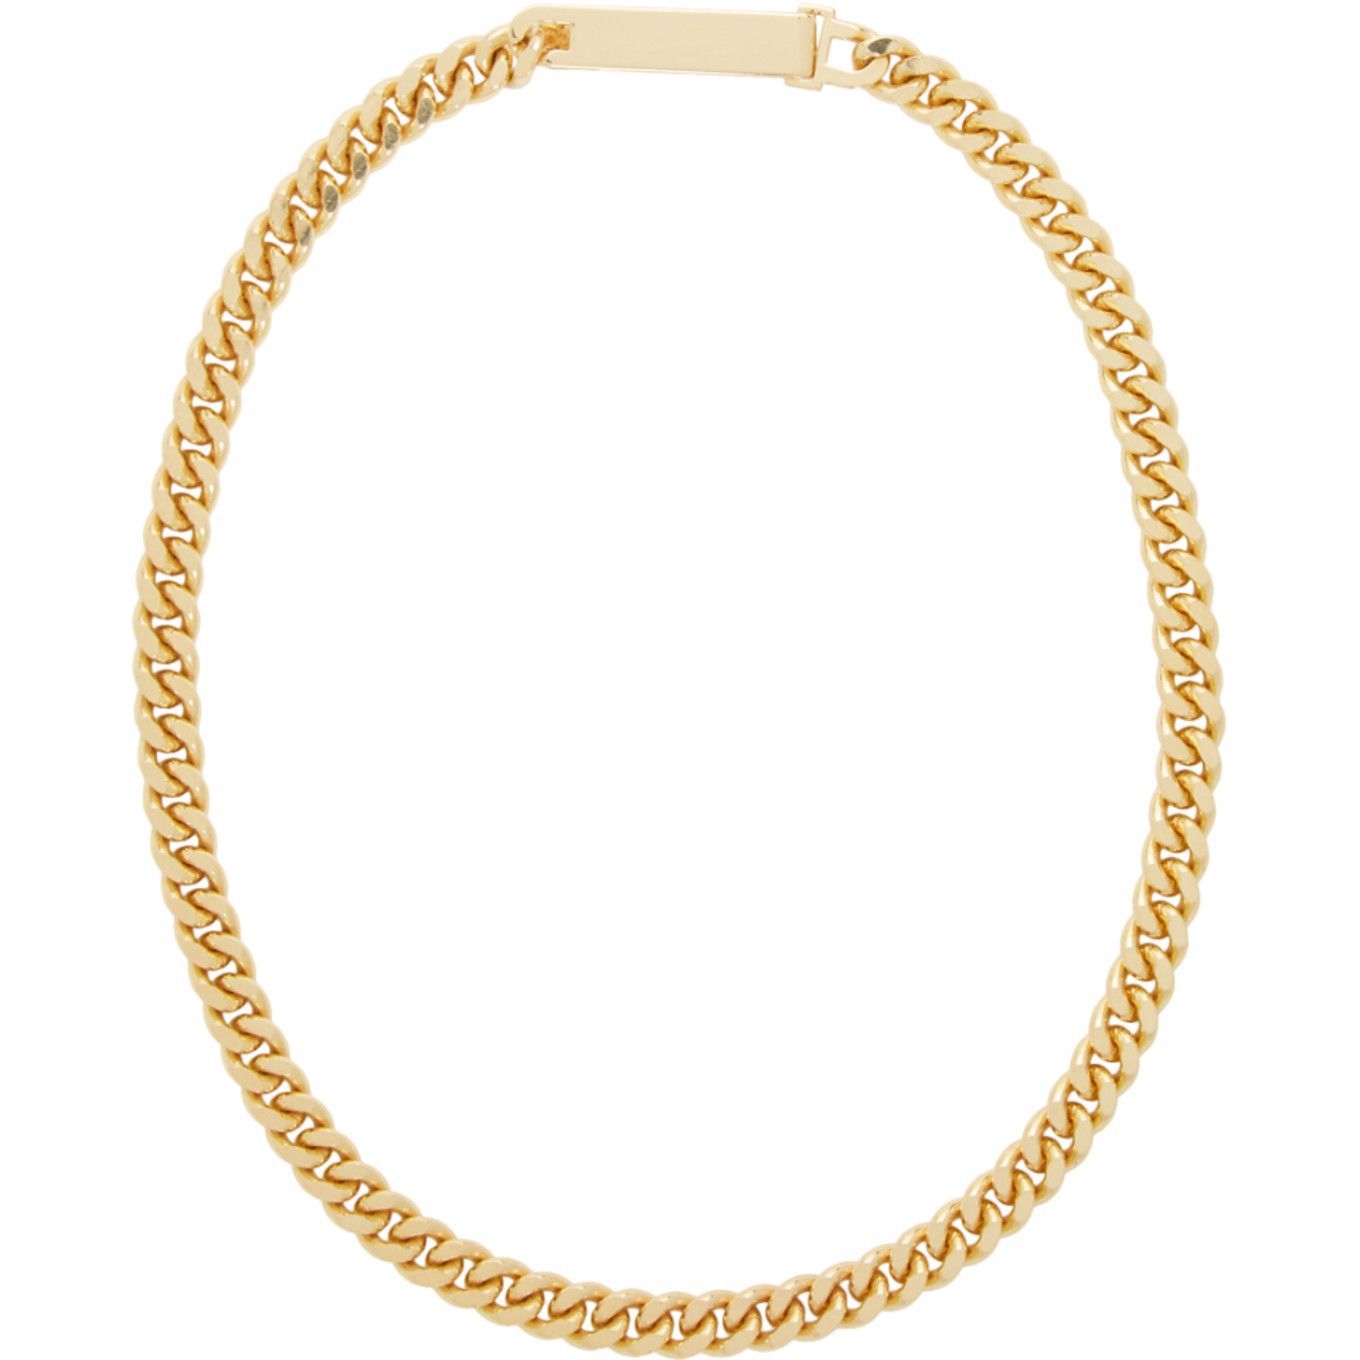 FREE UK P/&P CG5973...GOLD LARGE CHAIN LINK CHOKER NECKLACE